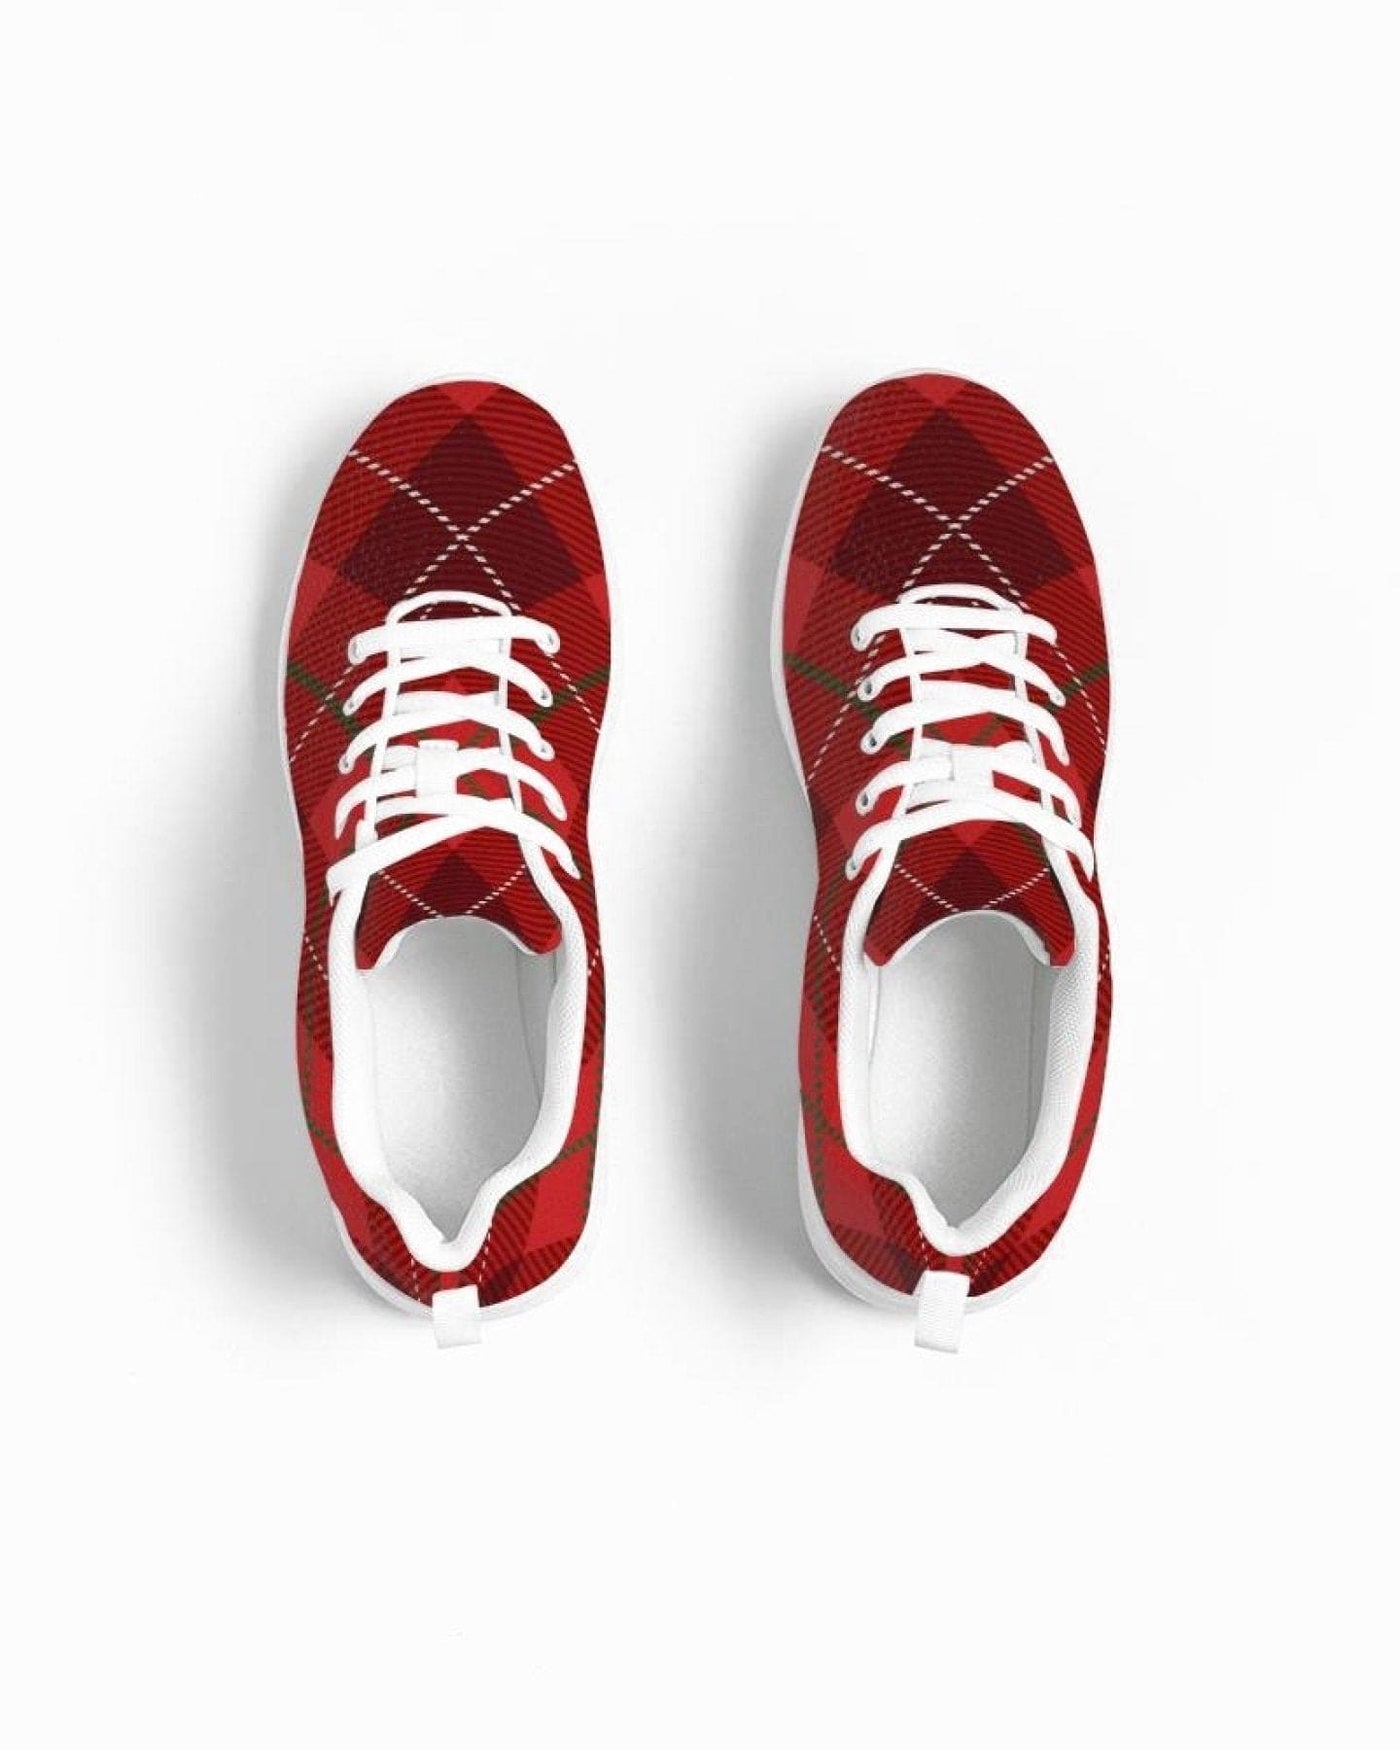 Womens Sneakers - Red Plaid Canvas Sports Shoes / Running - Womens | Sneakers